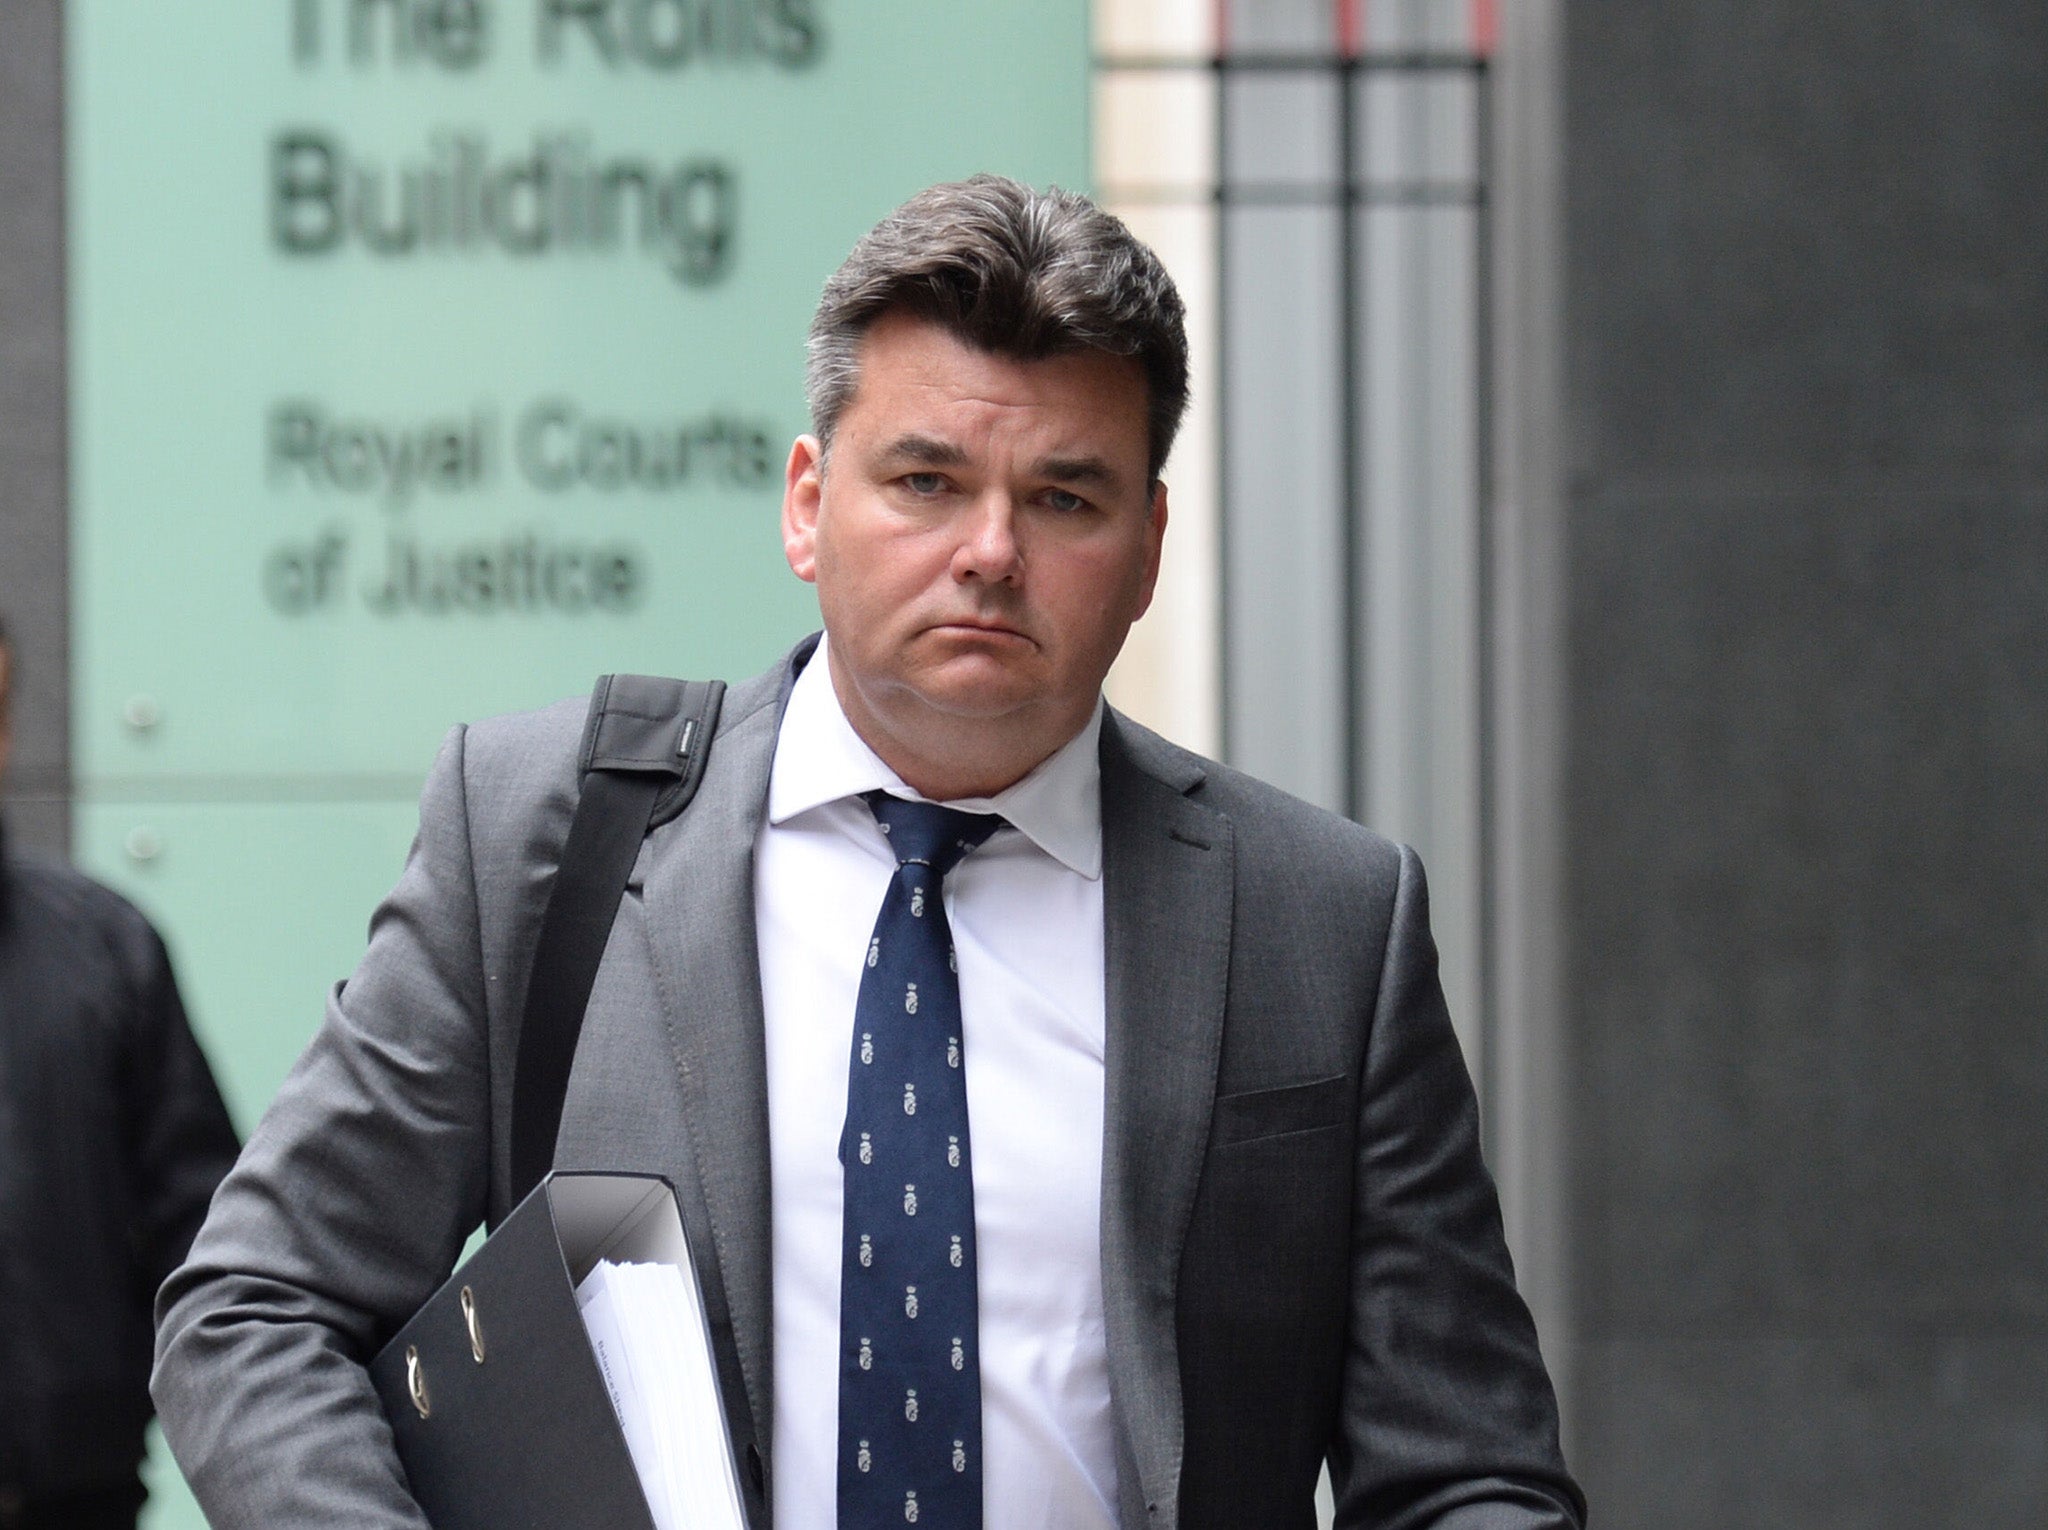 Dominic Chappell outside the High Court in London where a bid by BHS administrators to take control of the company he used to extract millions of pounds from the dying store chain was adjourned